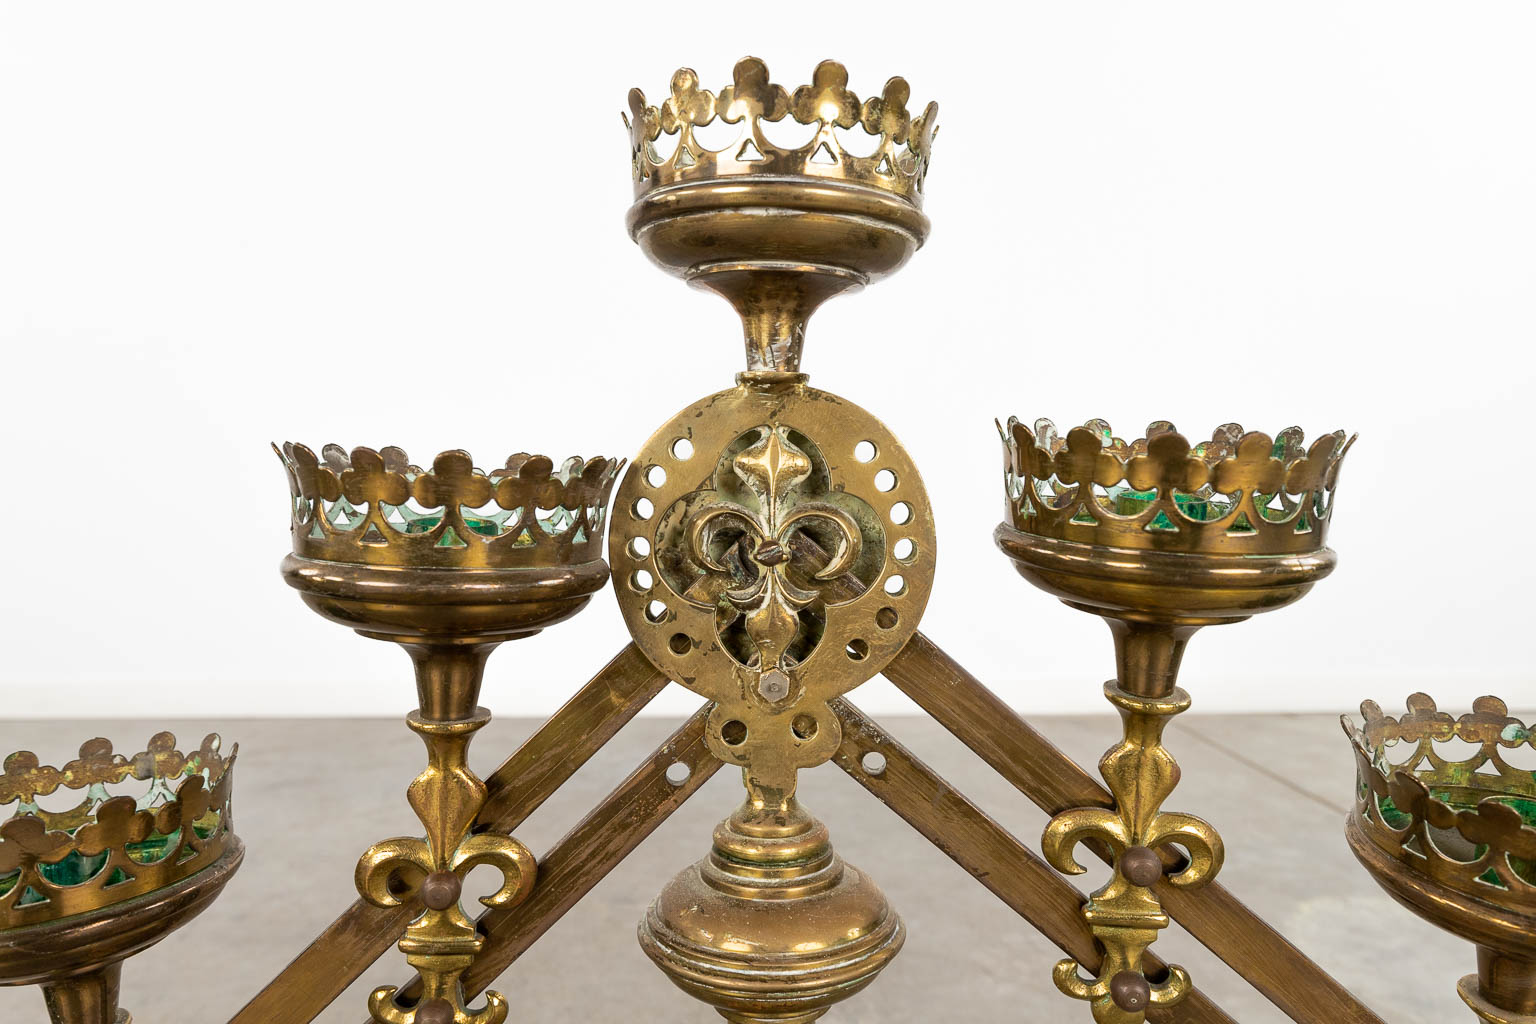 A pair of bronze candelabra with adjustable arms, and 7 candle holders. Decor of Fleur De Lis. (W:76 x H:52 cm)